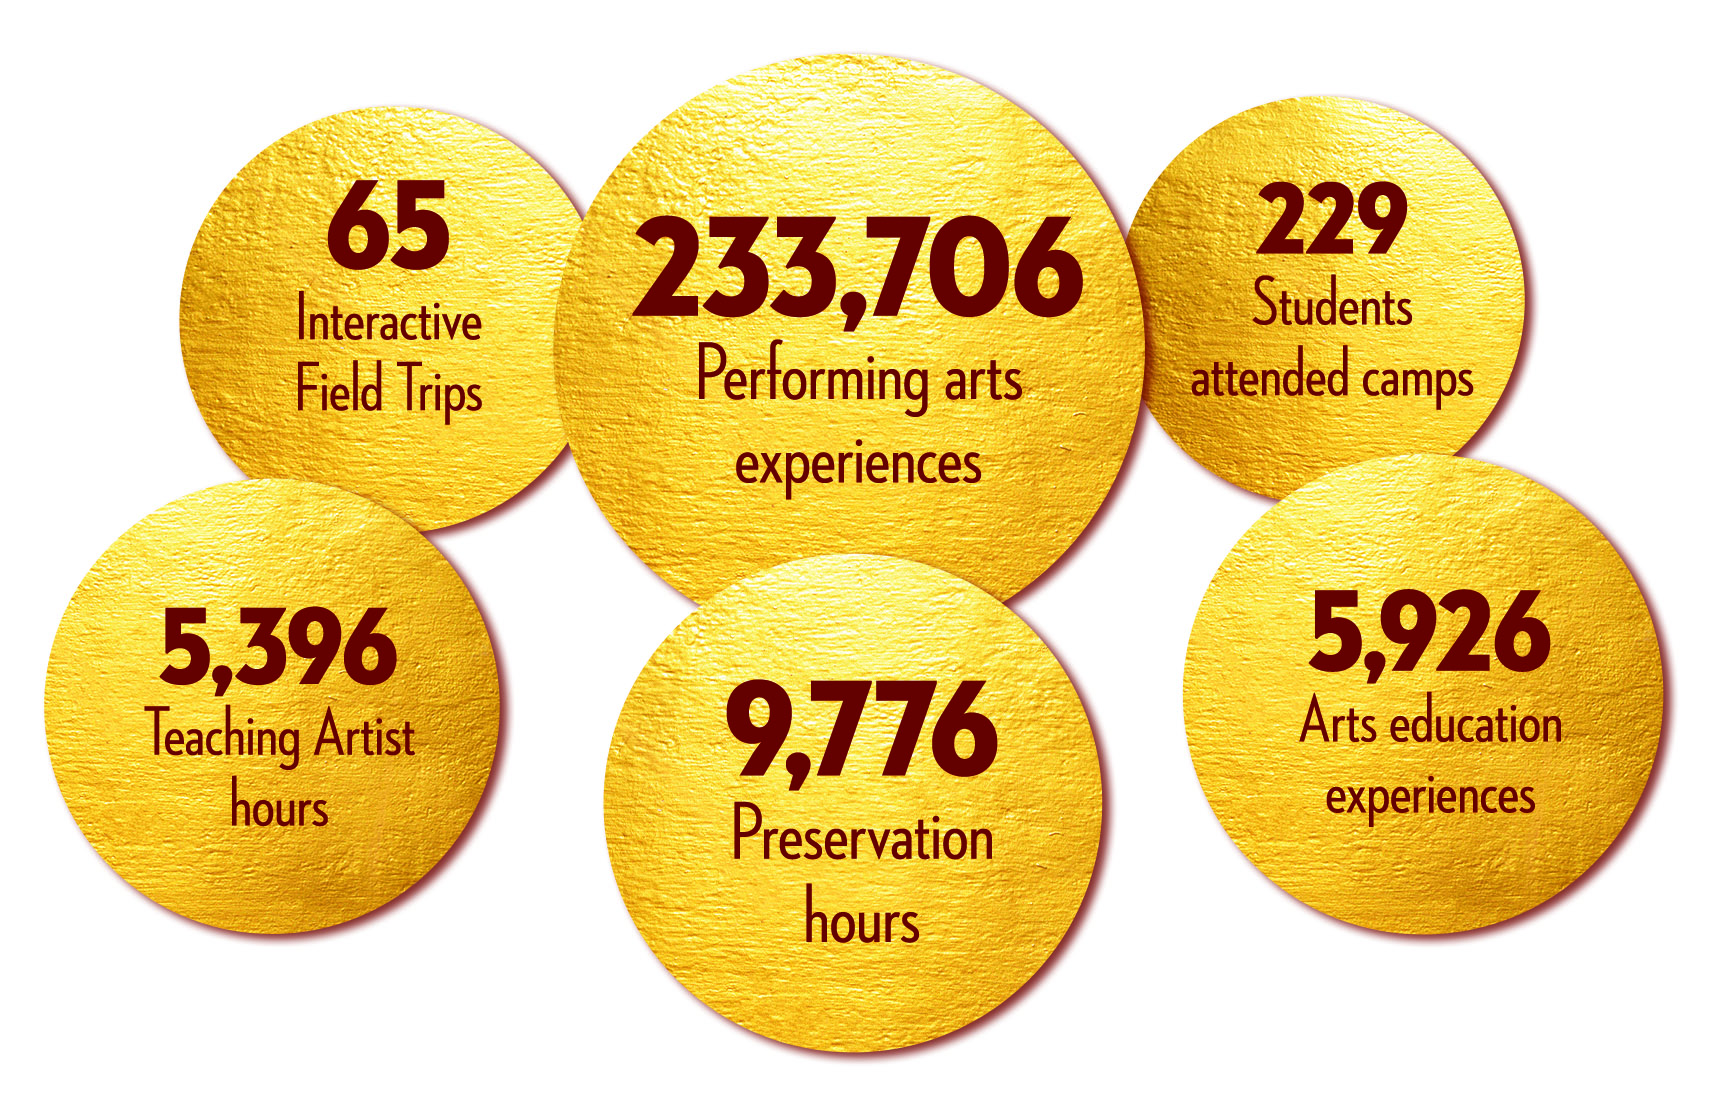 65 interactive field trips, 233,706 performing arts experiences, 229 students attended camps, 5,396 teaching artist hours, 9,776 preservation hours, and 5,926 arts education experiences.